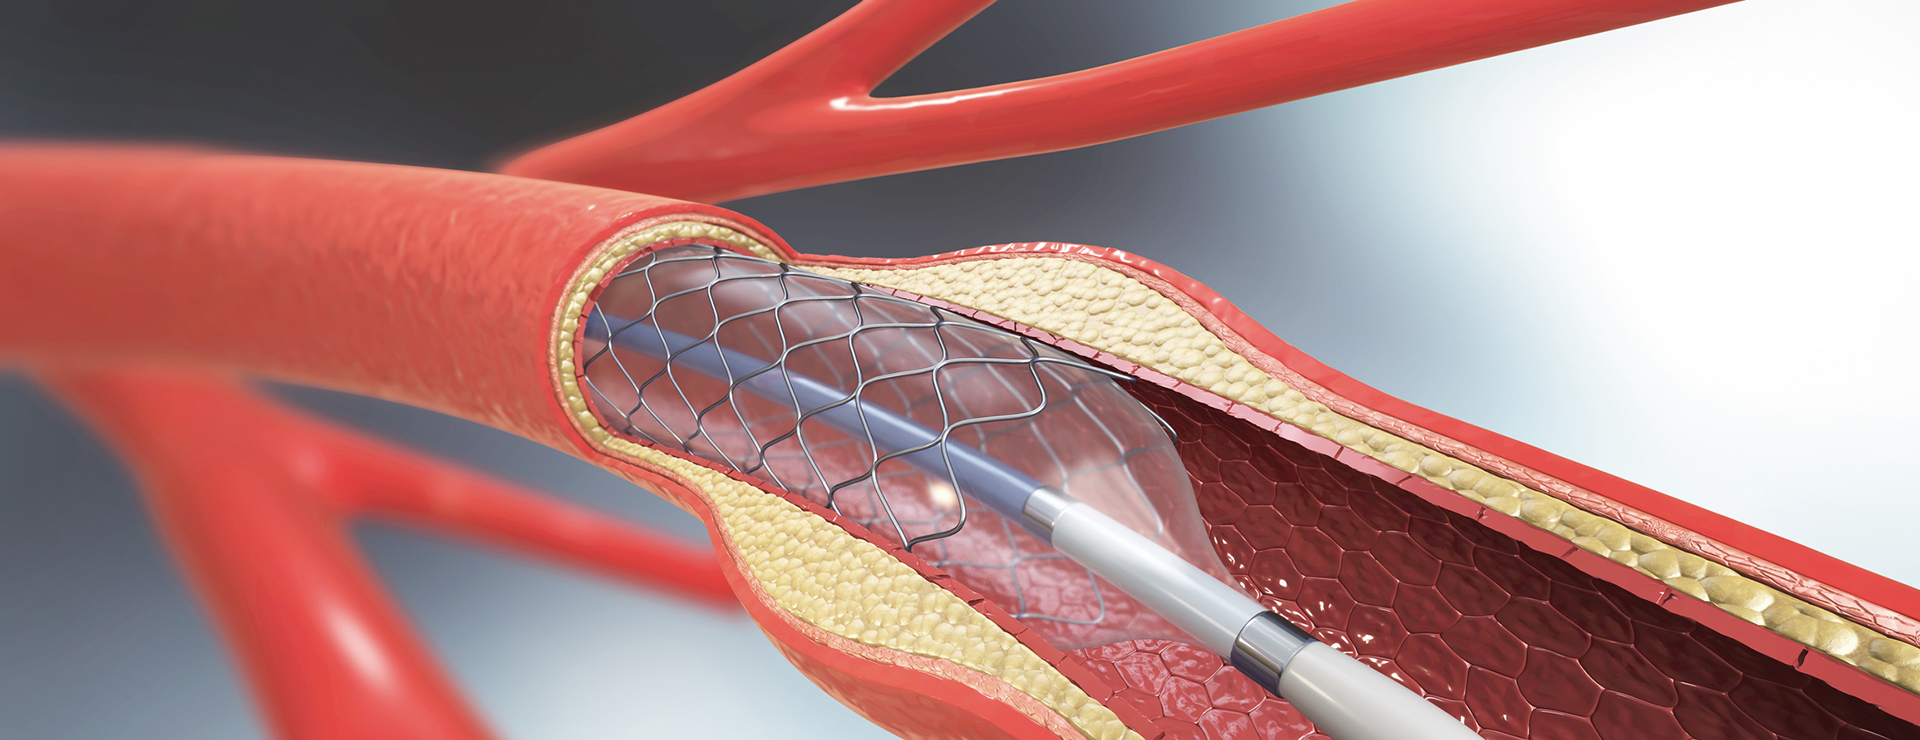 Case Study:  20-YEAR-OLD STENTS, TREATED AGAIN WITH ROTA-ANGIOPLASTY